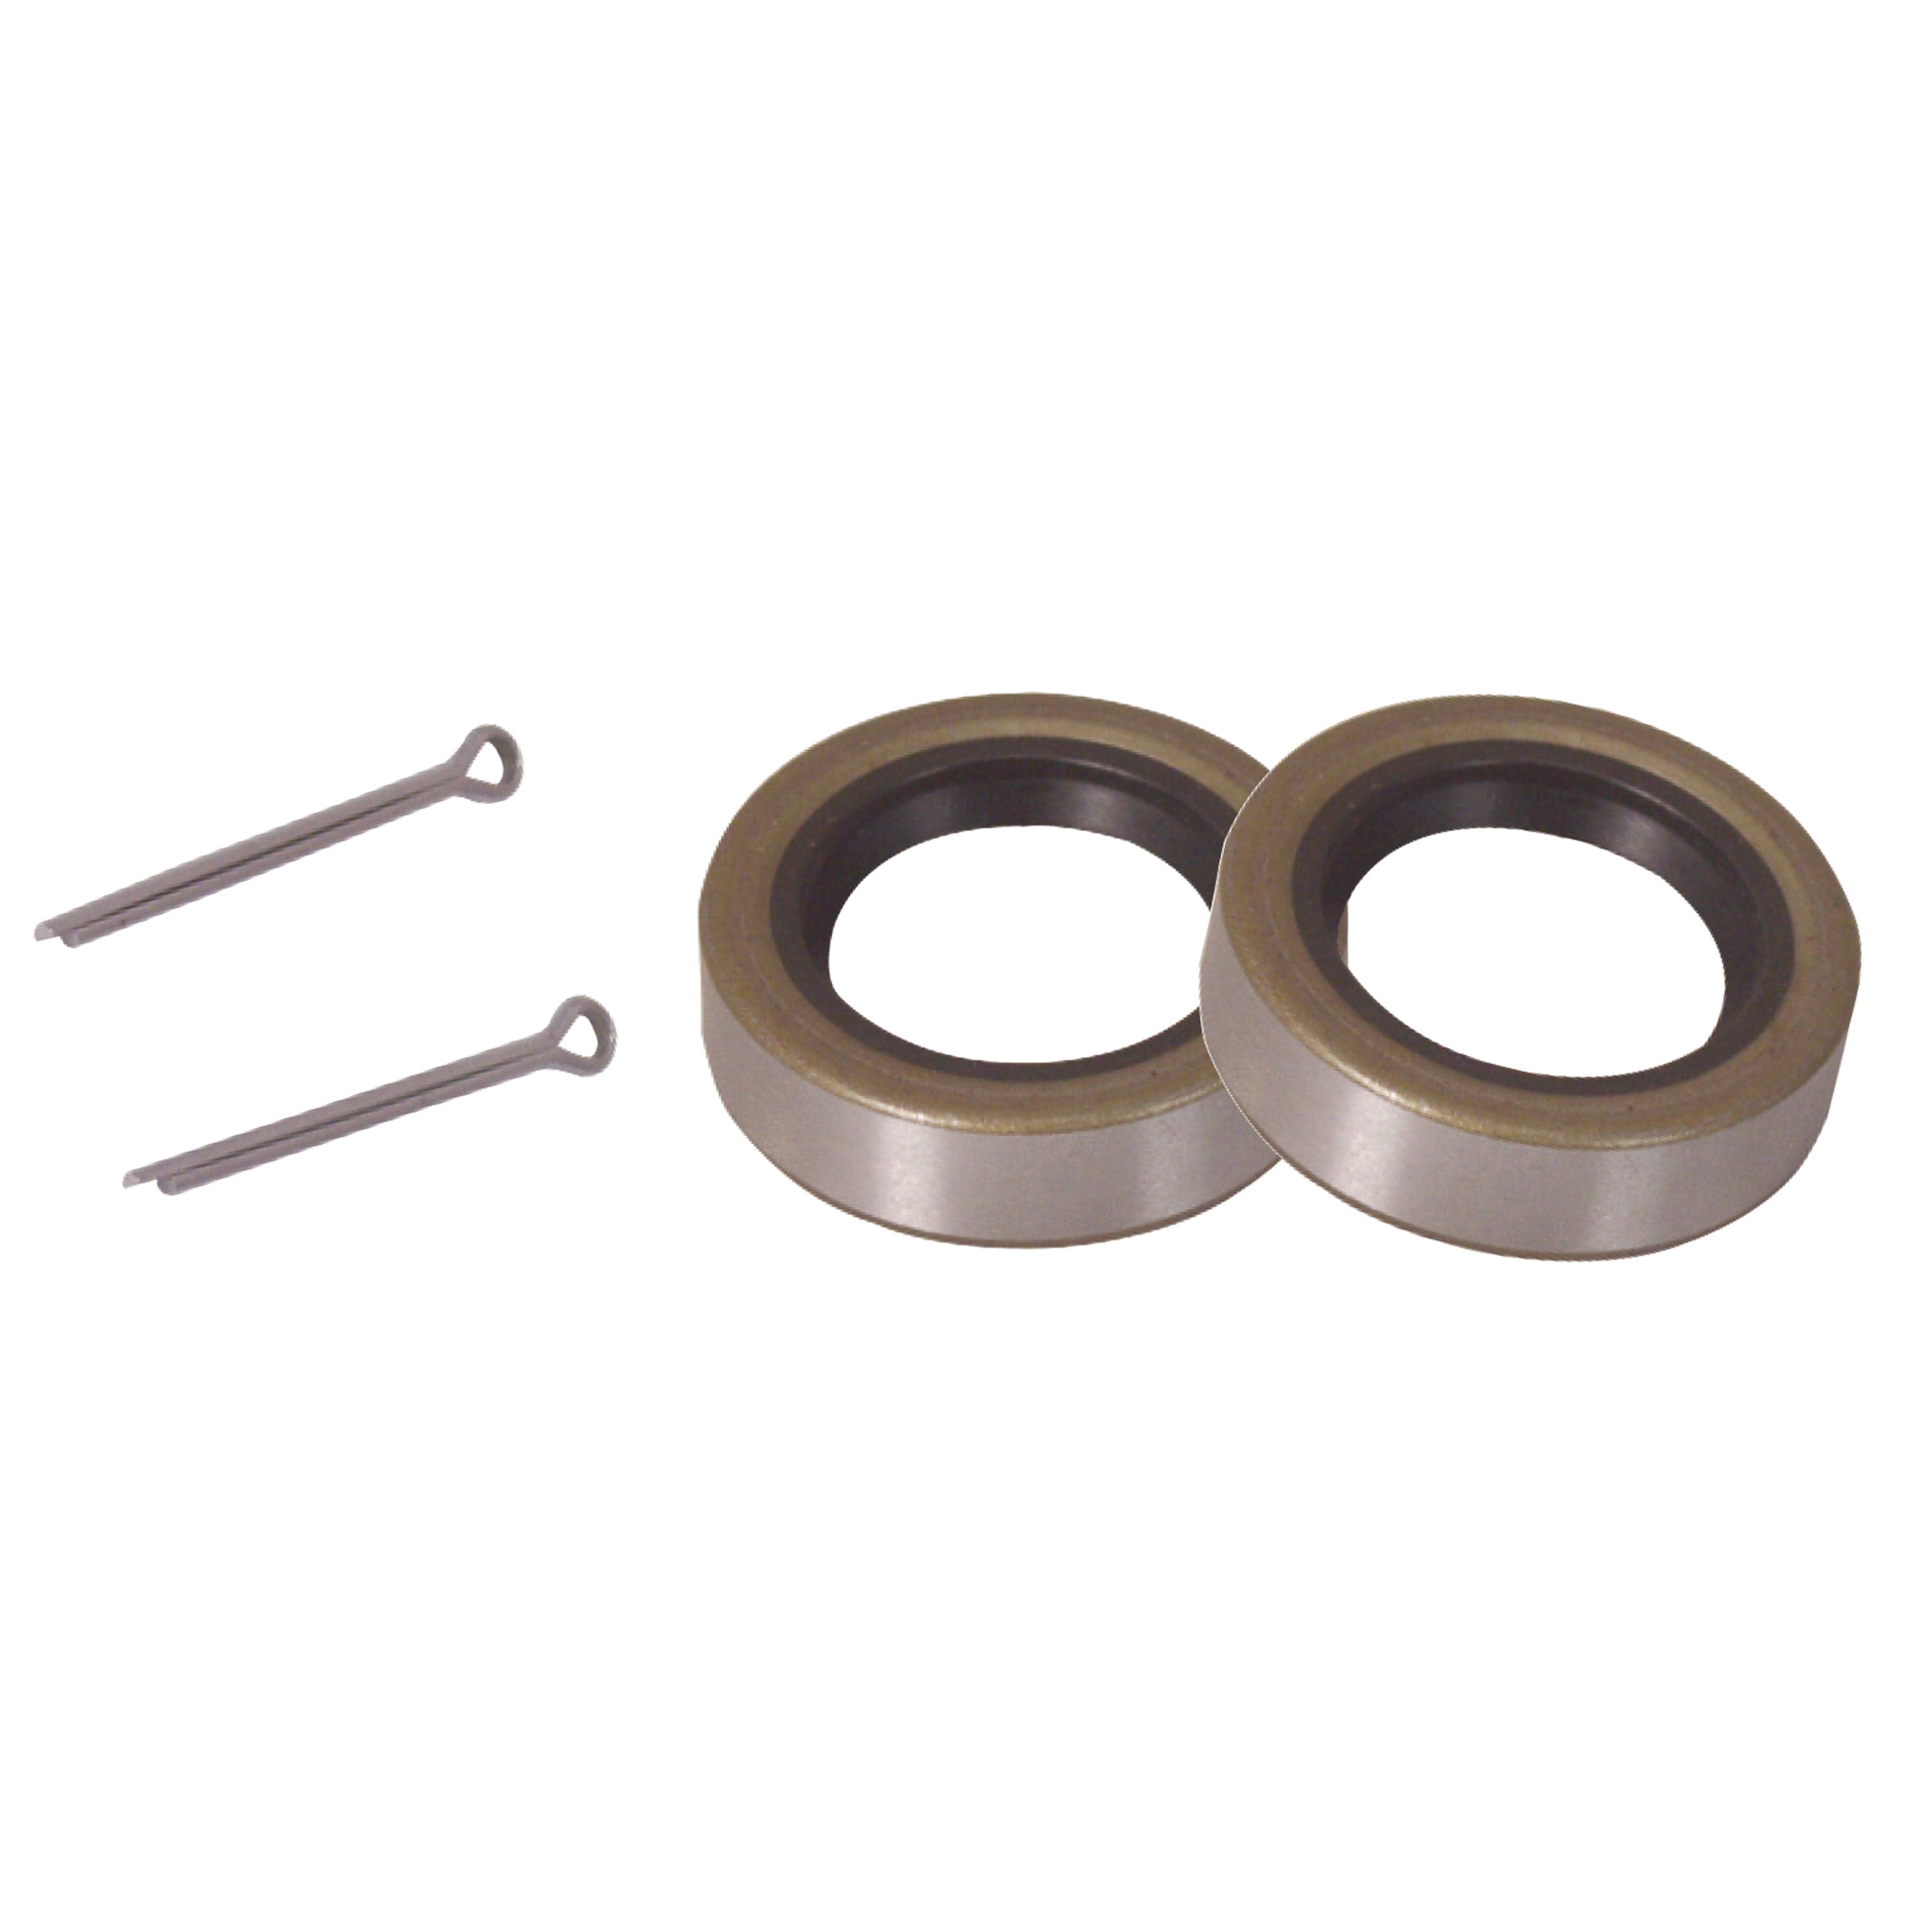 Dutton-Lainson 21883 Bearing Seals and Cotter Keys - 3/4 in.